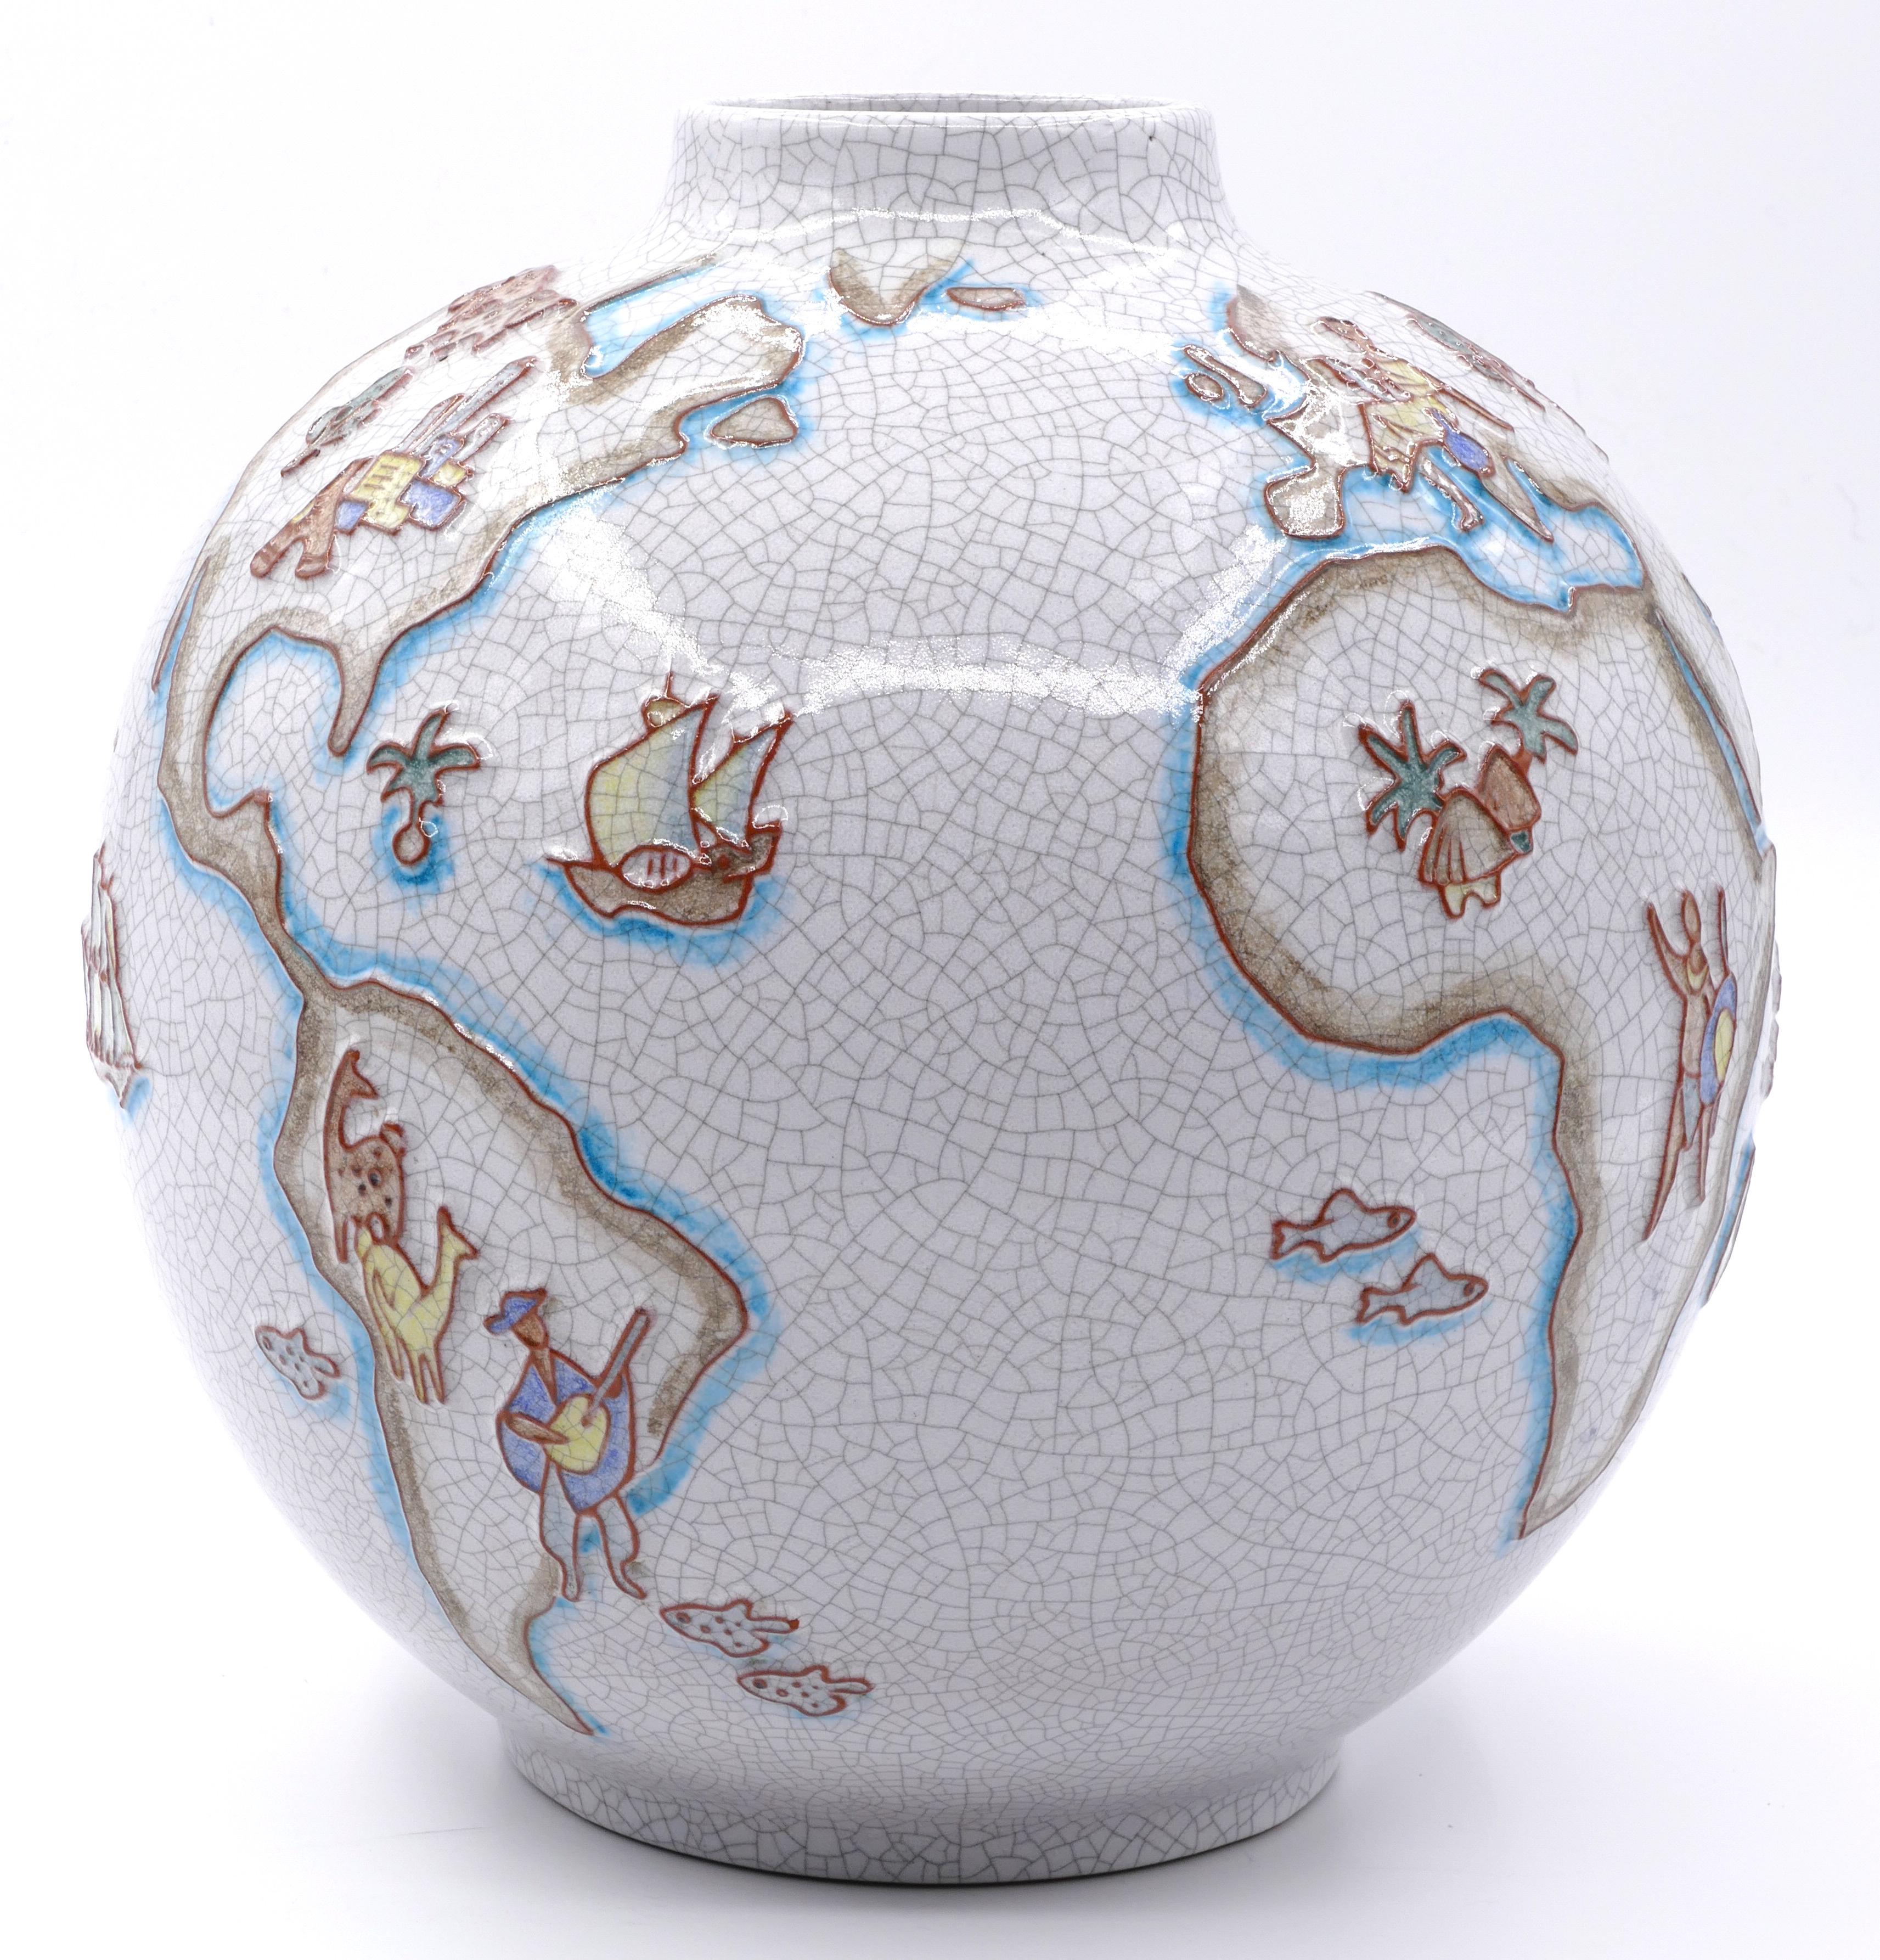 Mid-Century Modern Vintage Majolica vase with world map, by Karl-Heinz Feisst, Germany, 1955